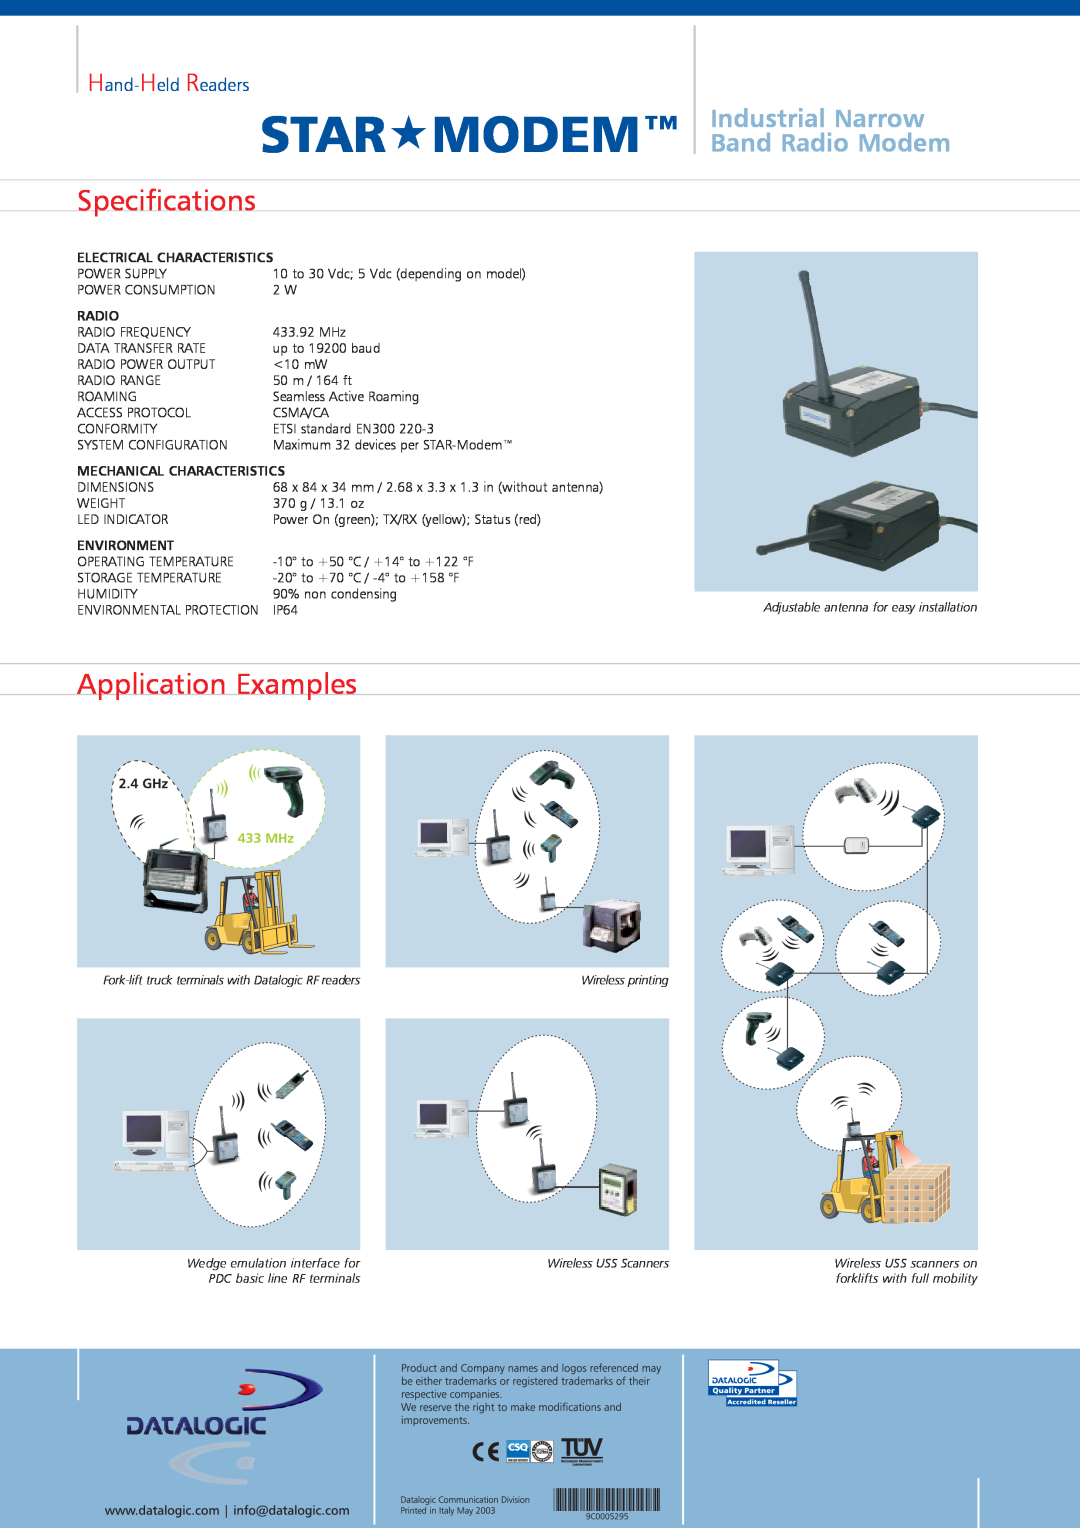 Datalogic Scanning RS232 Specifications, Application Examples, StarModem, Industrial Narrow Band Radio Modem, Environment 